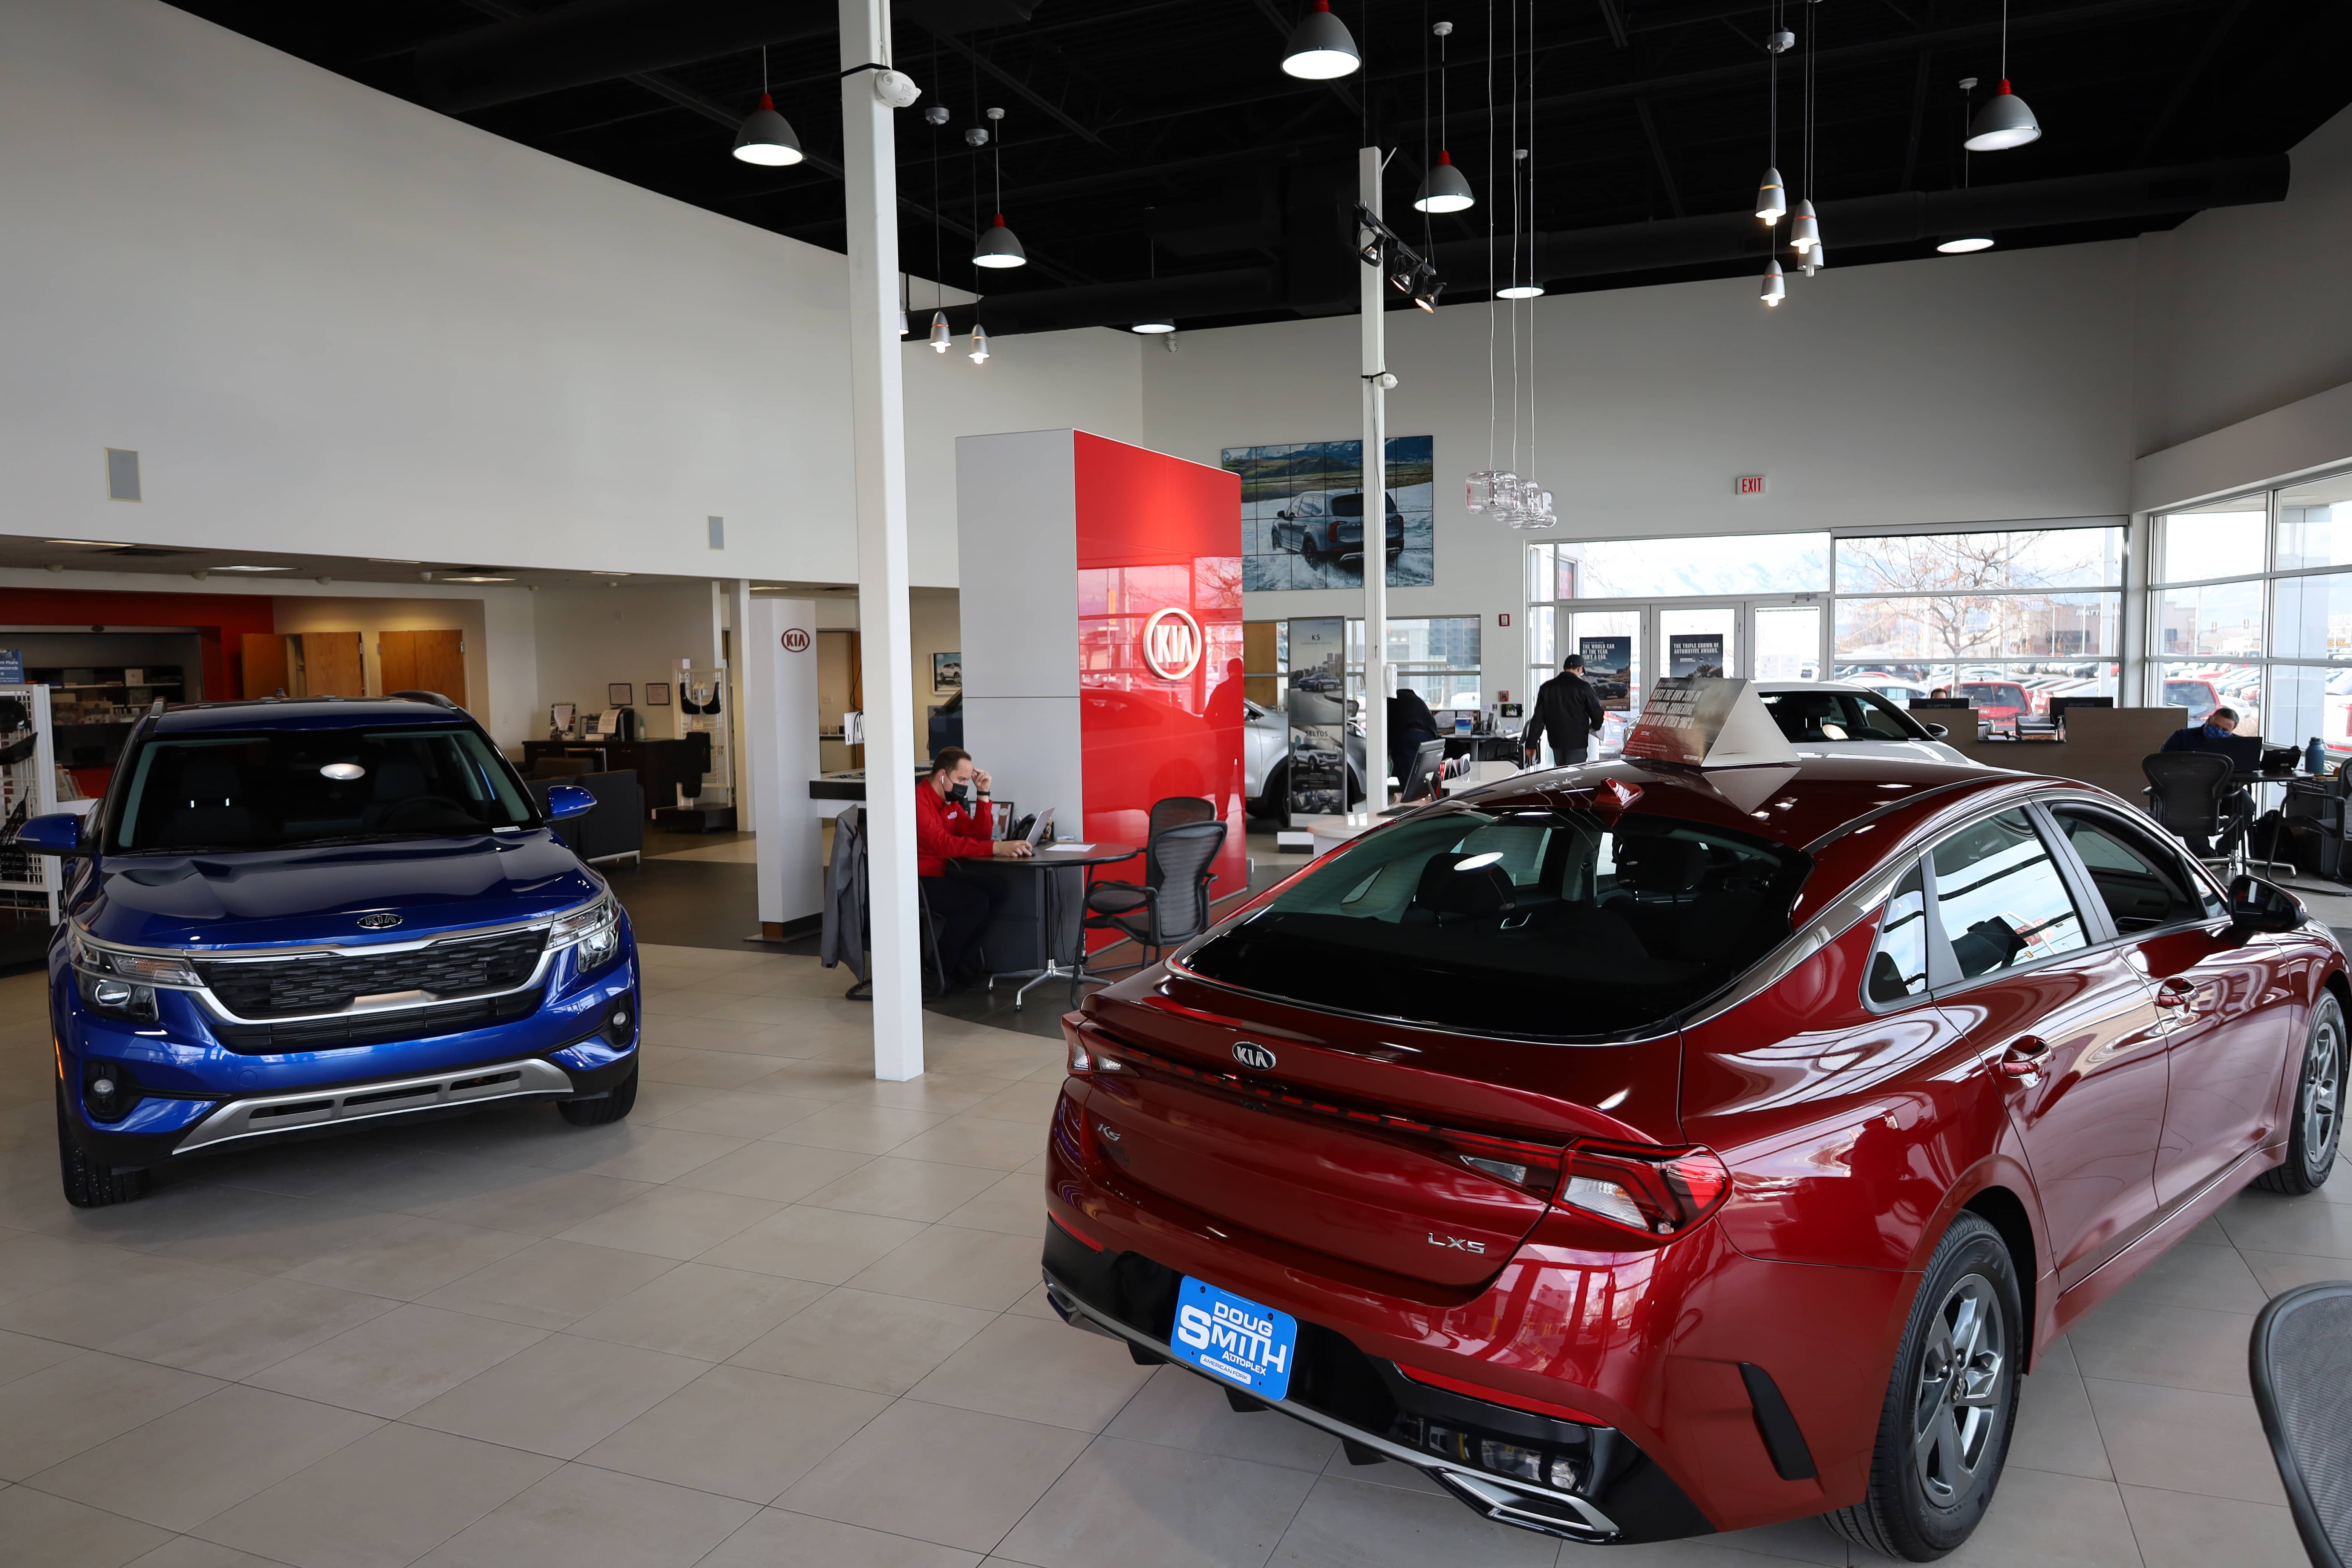 We have a large showroom of some of our top model Kia's. We have financing available!